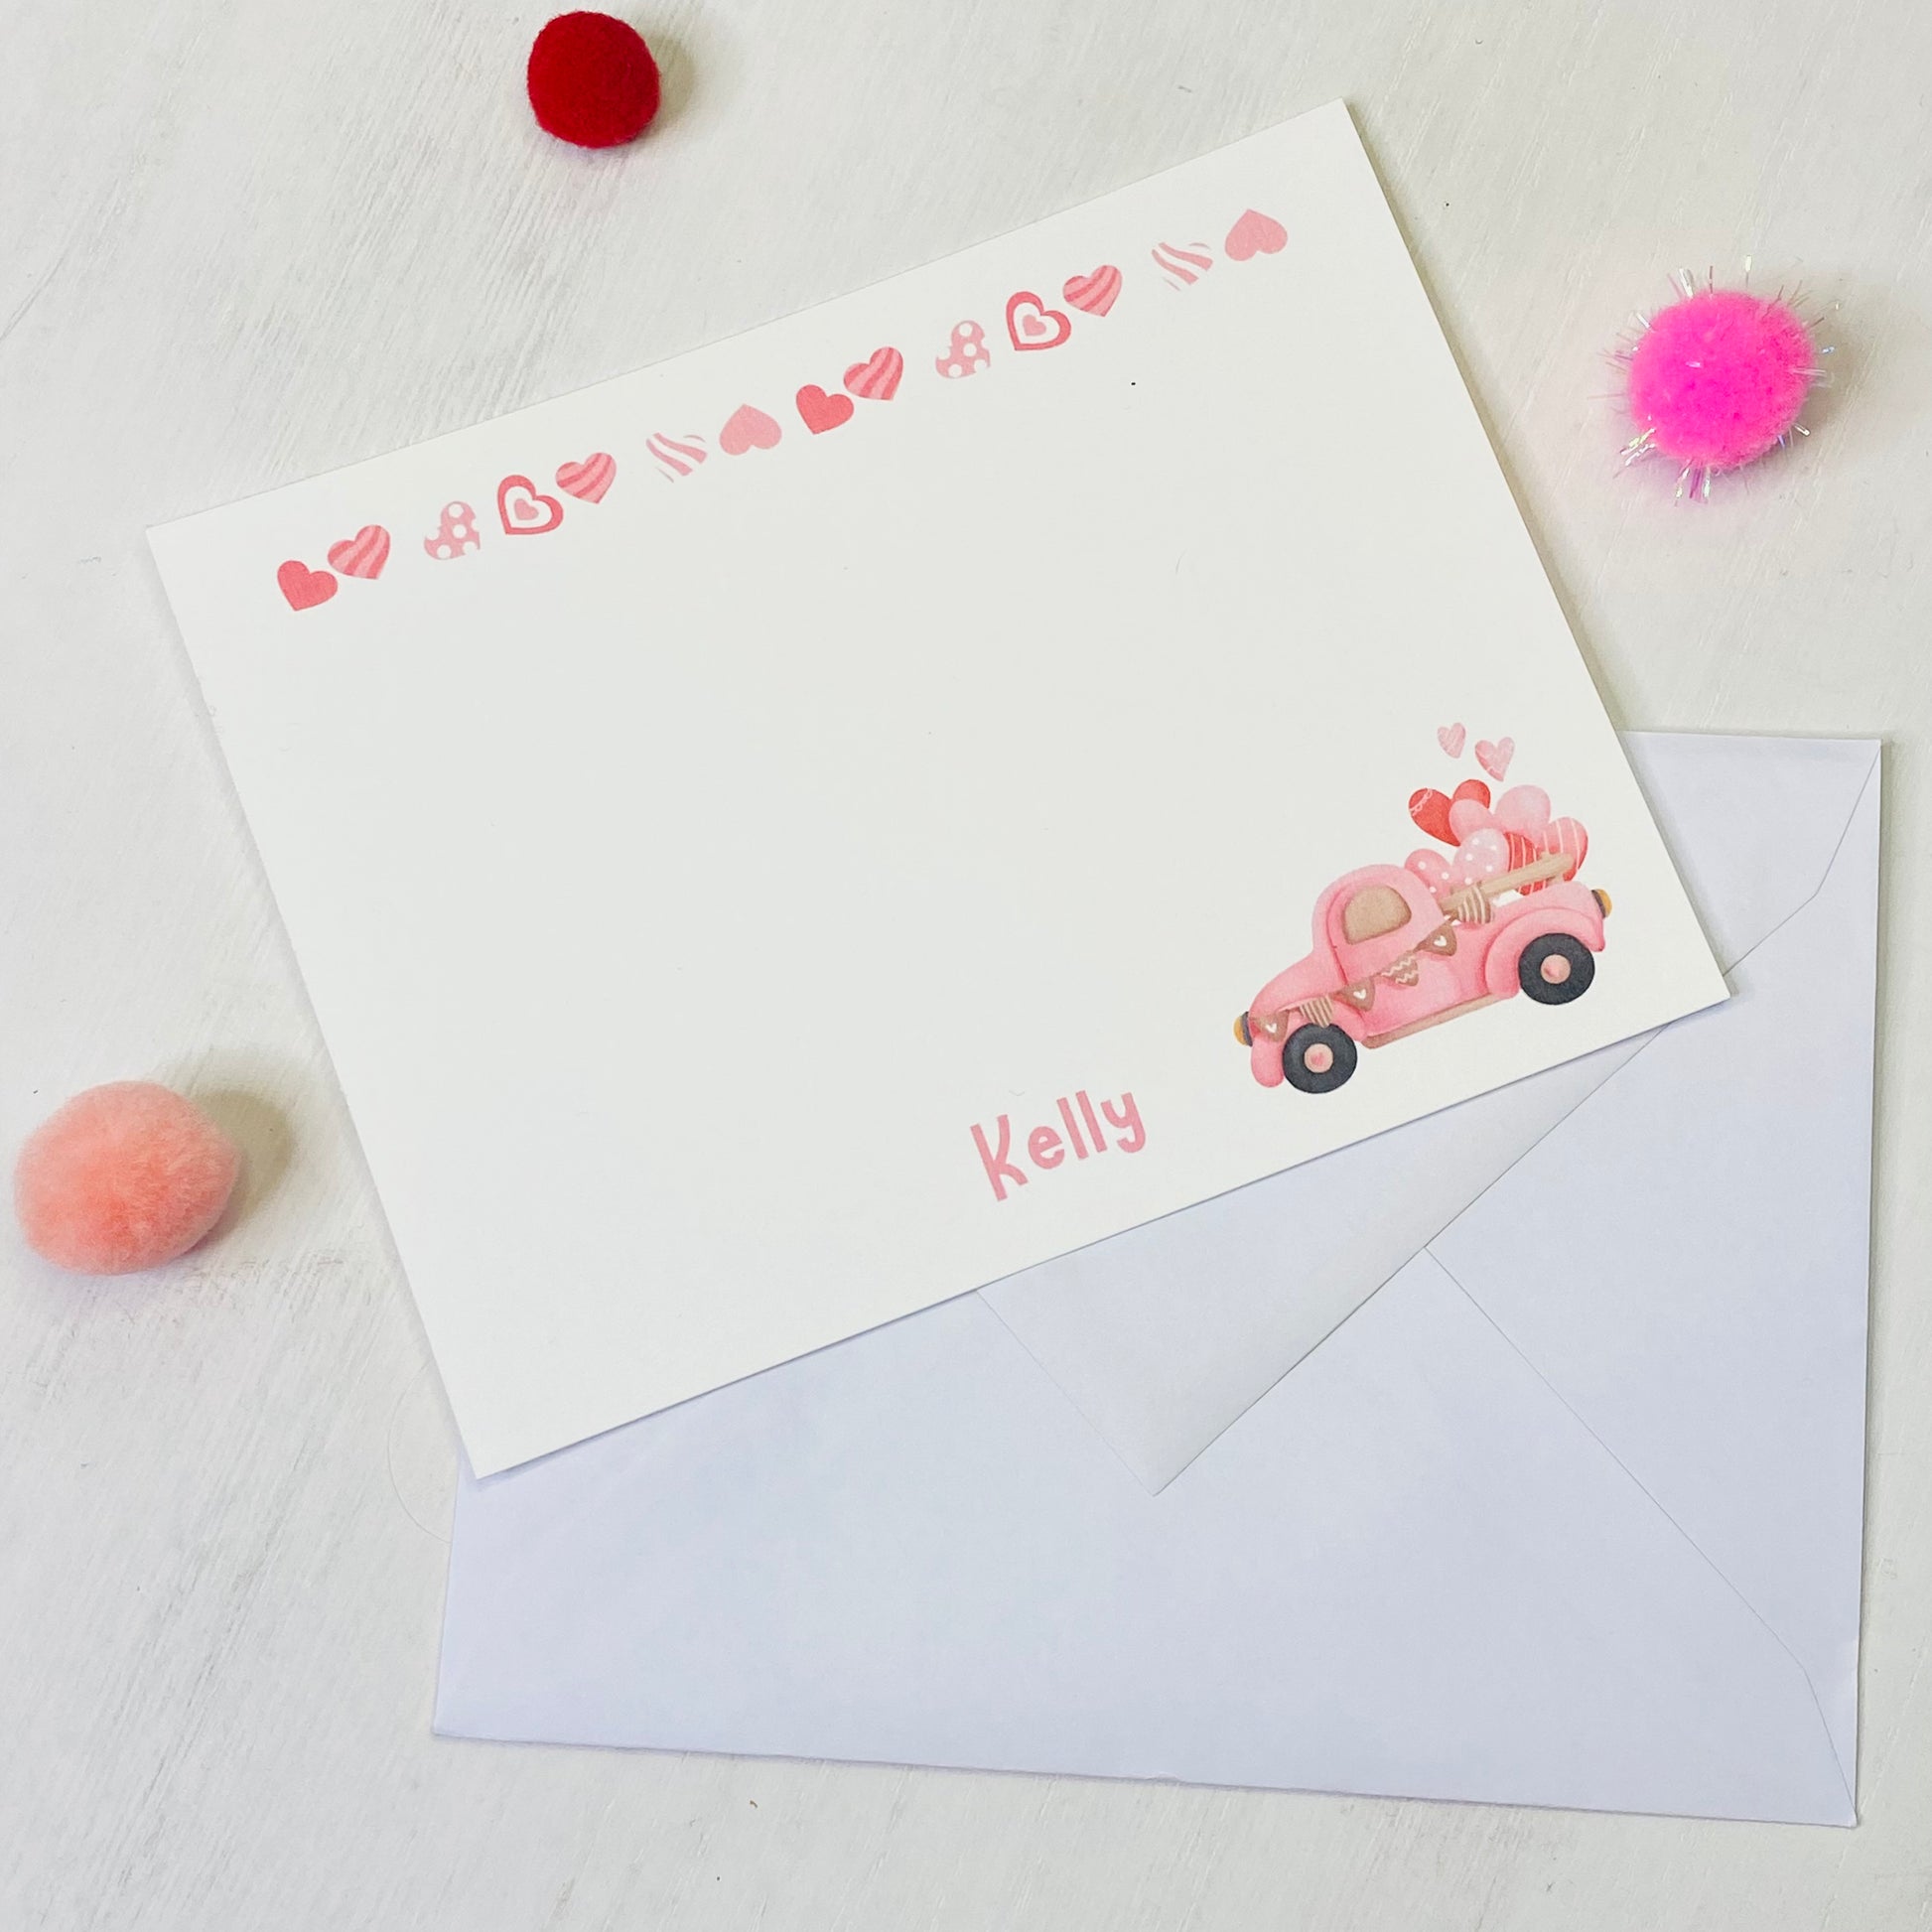 Adorable Valentine Notecards Set for kids and adults! Personalized for extra fun! Comes with a free multi-pen , perfect for gifting!